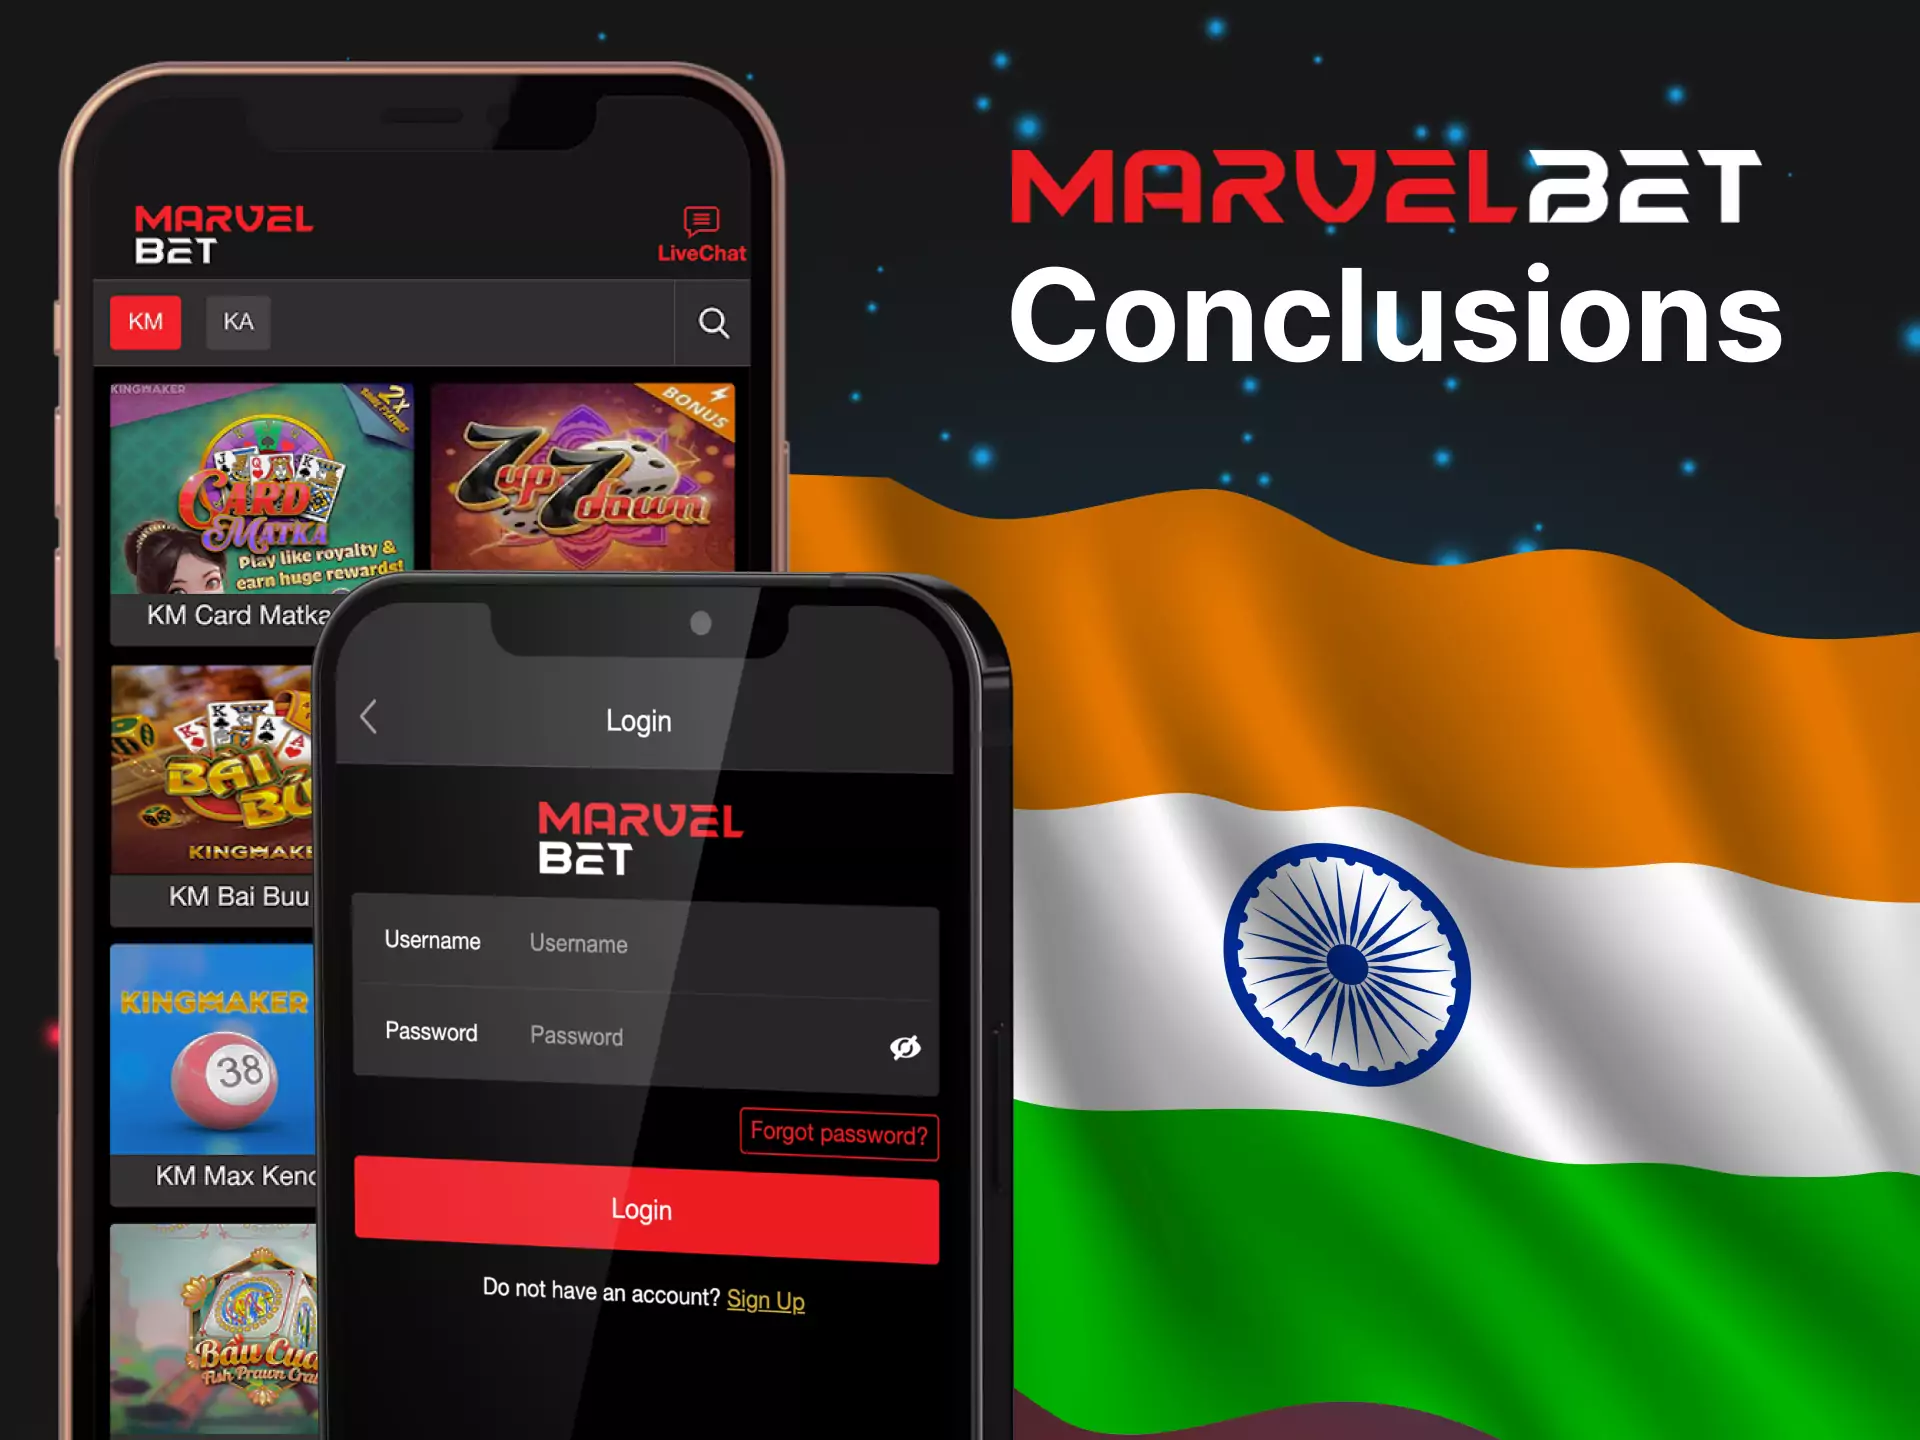 The Marvelbet team has developed a well-done app.